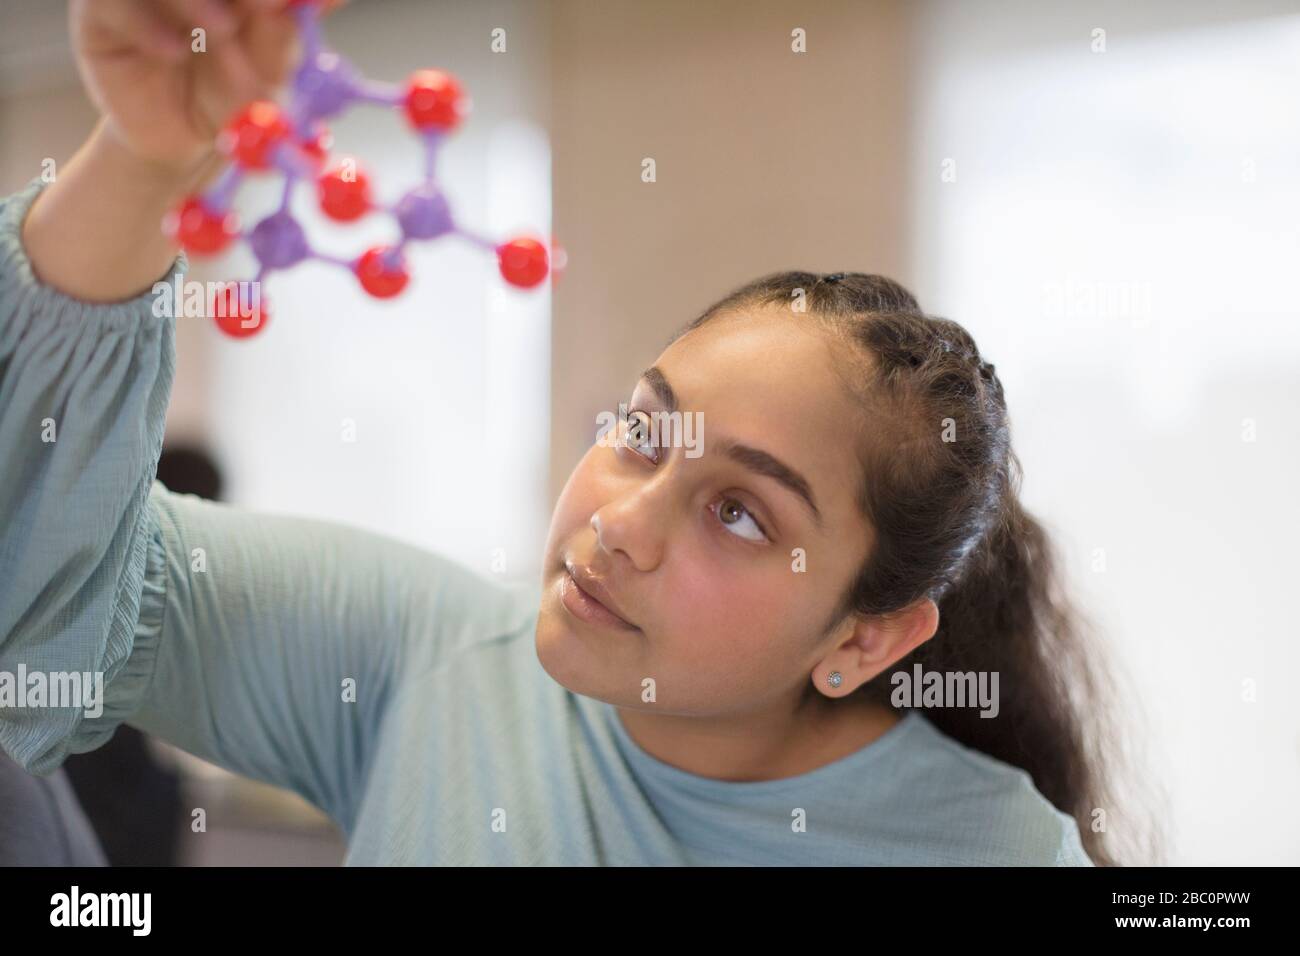 Curious girl student examining molecular structure in classroom Stock Photo